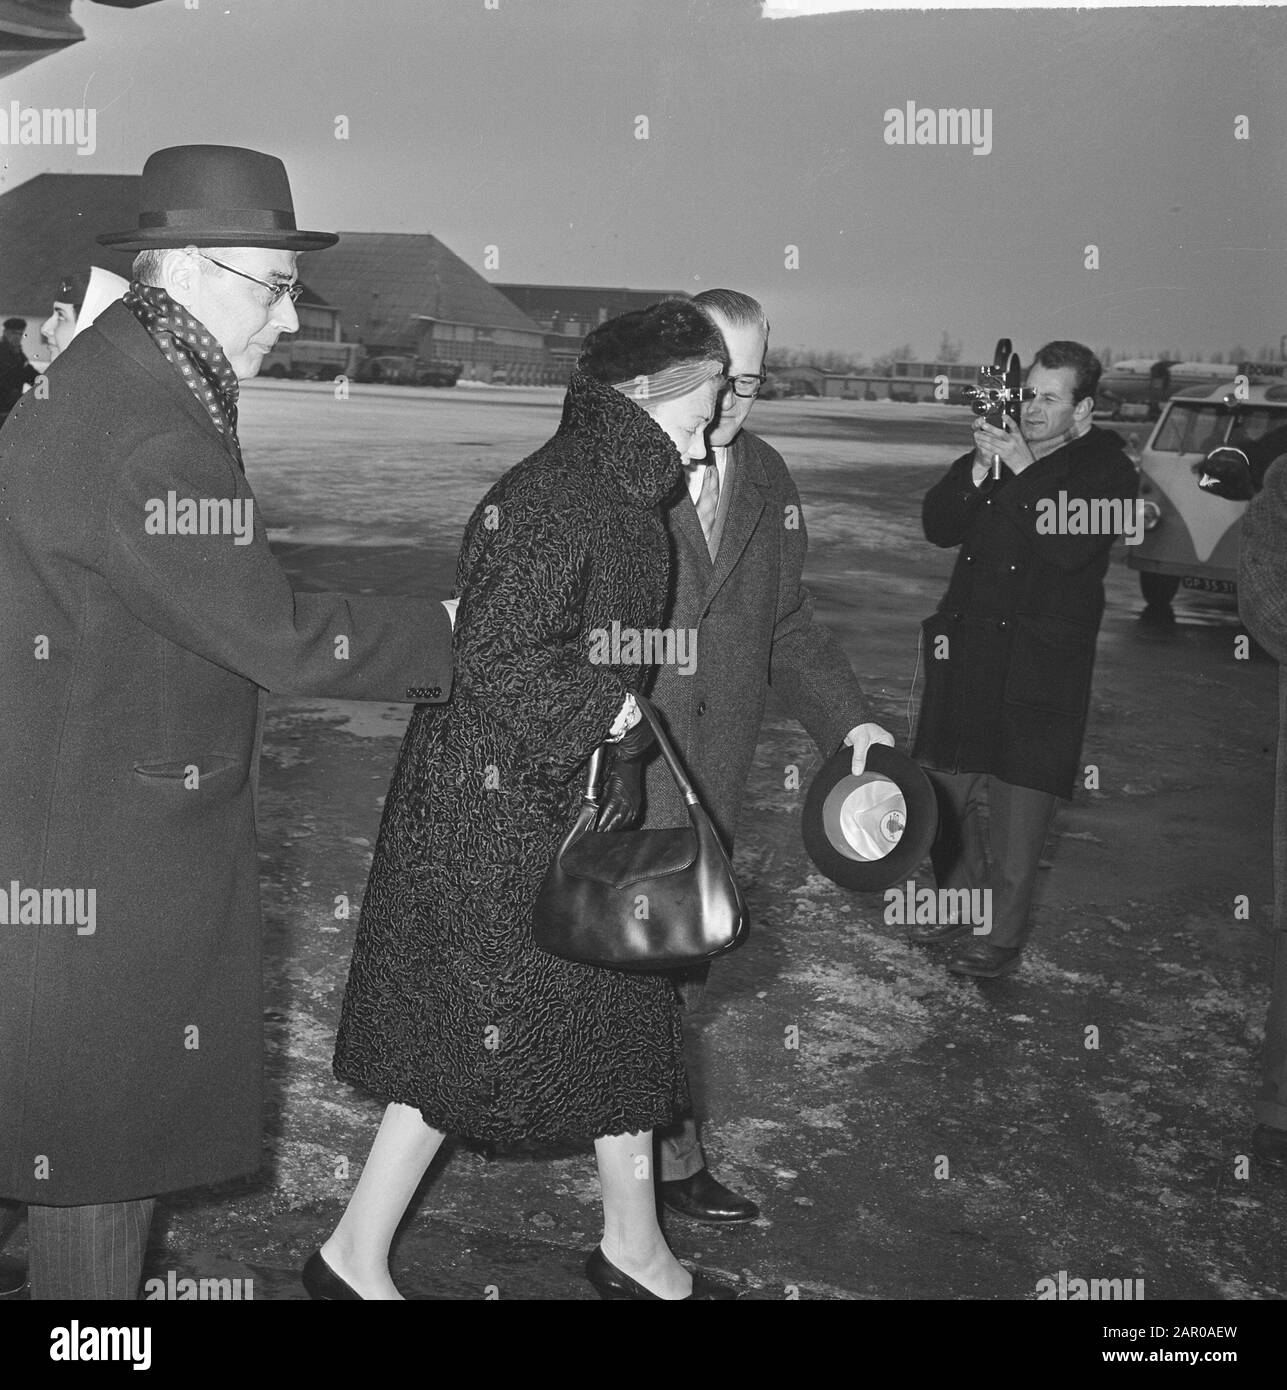 Married Couple Van Hall returned from holidays from Rome due to illness Date: February 15, 1963 Keywords: couples, holidays, diseases Stock Photo